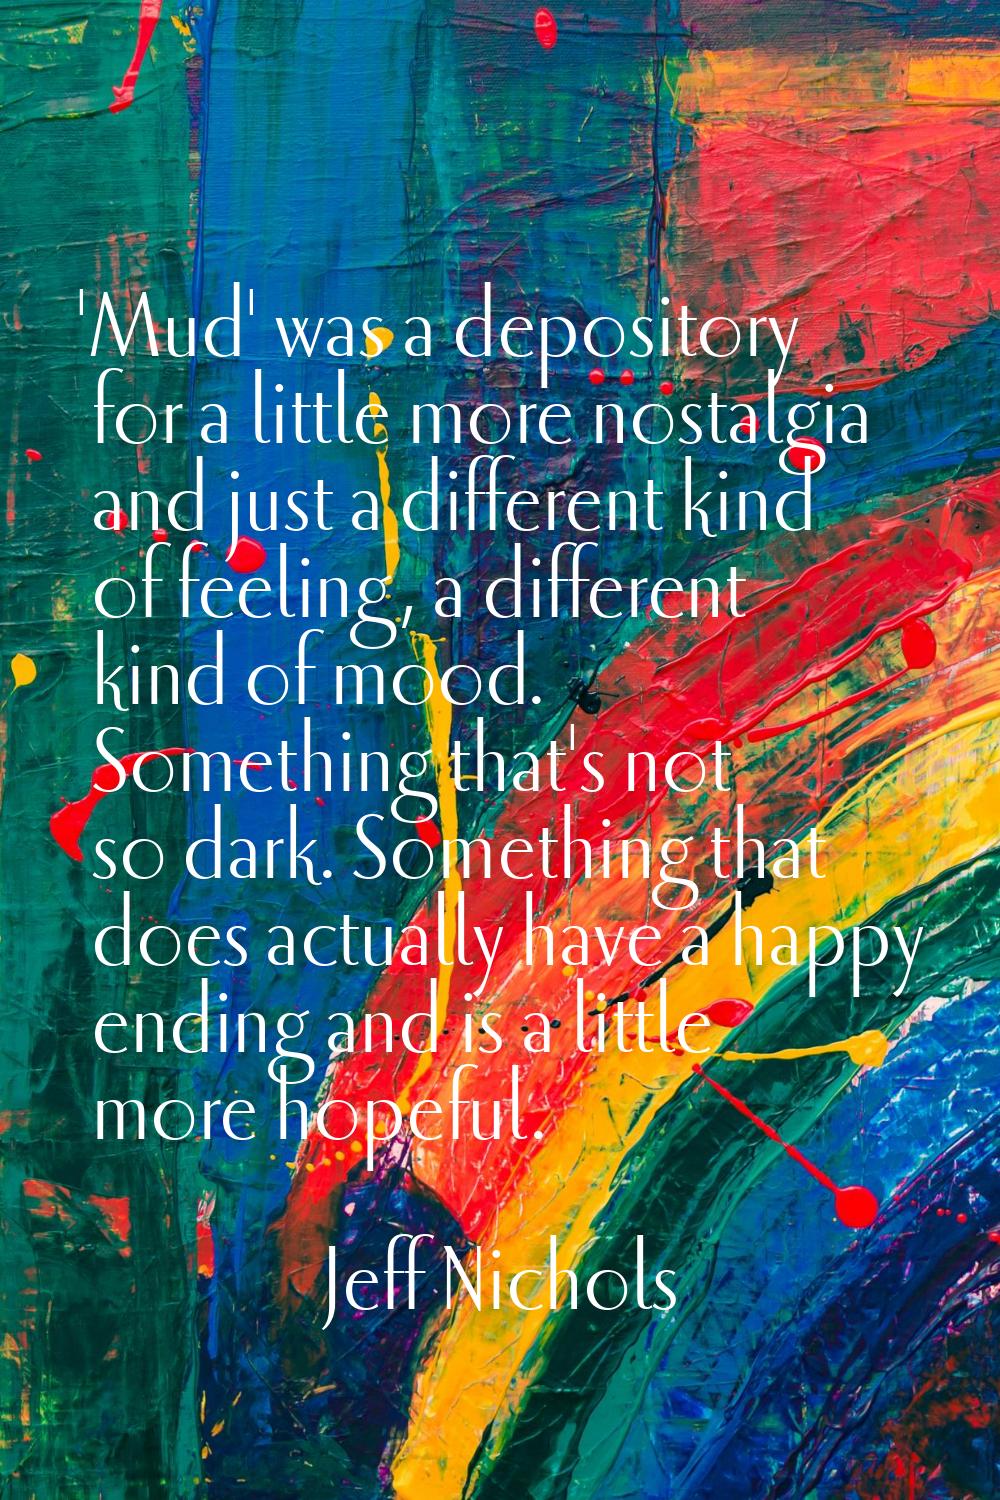 'Mud' was a depository for a little more nostalgia and just a different kind of feeling, a differen